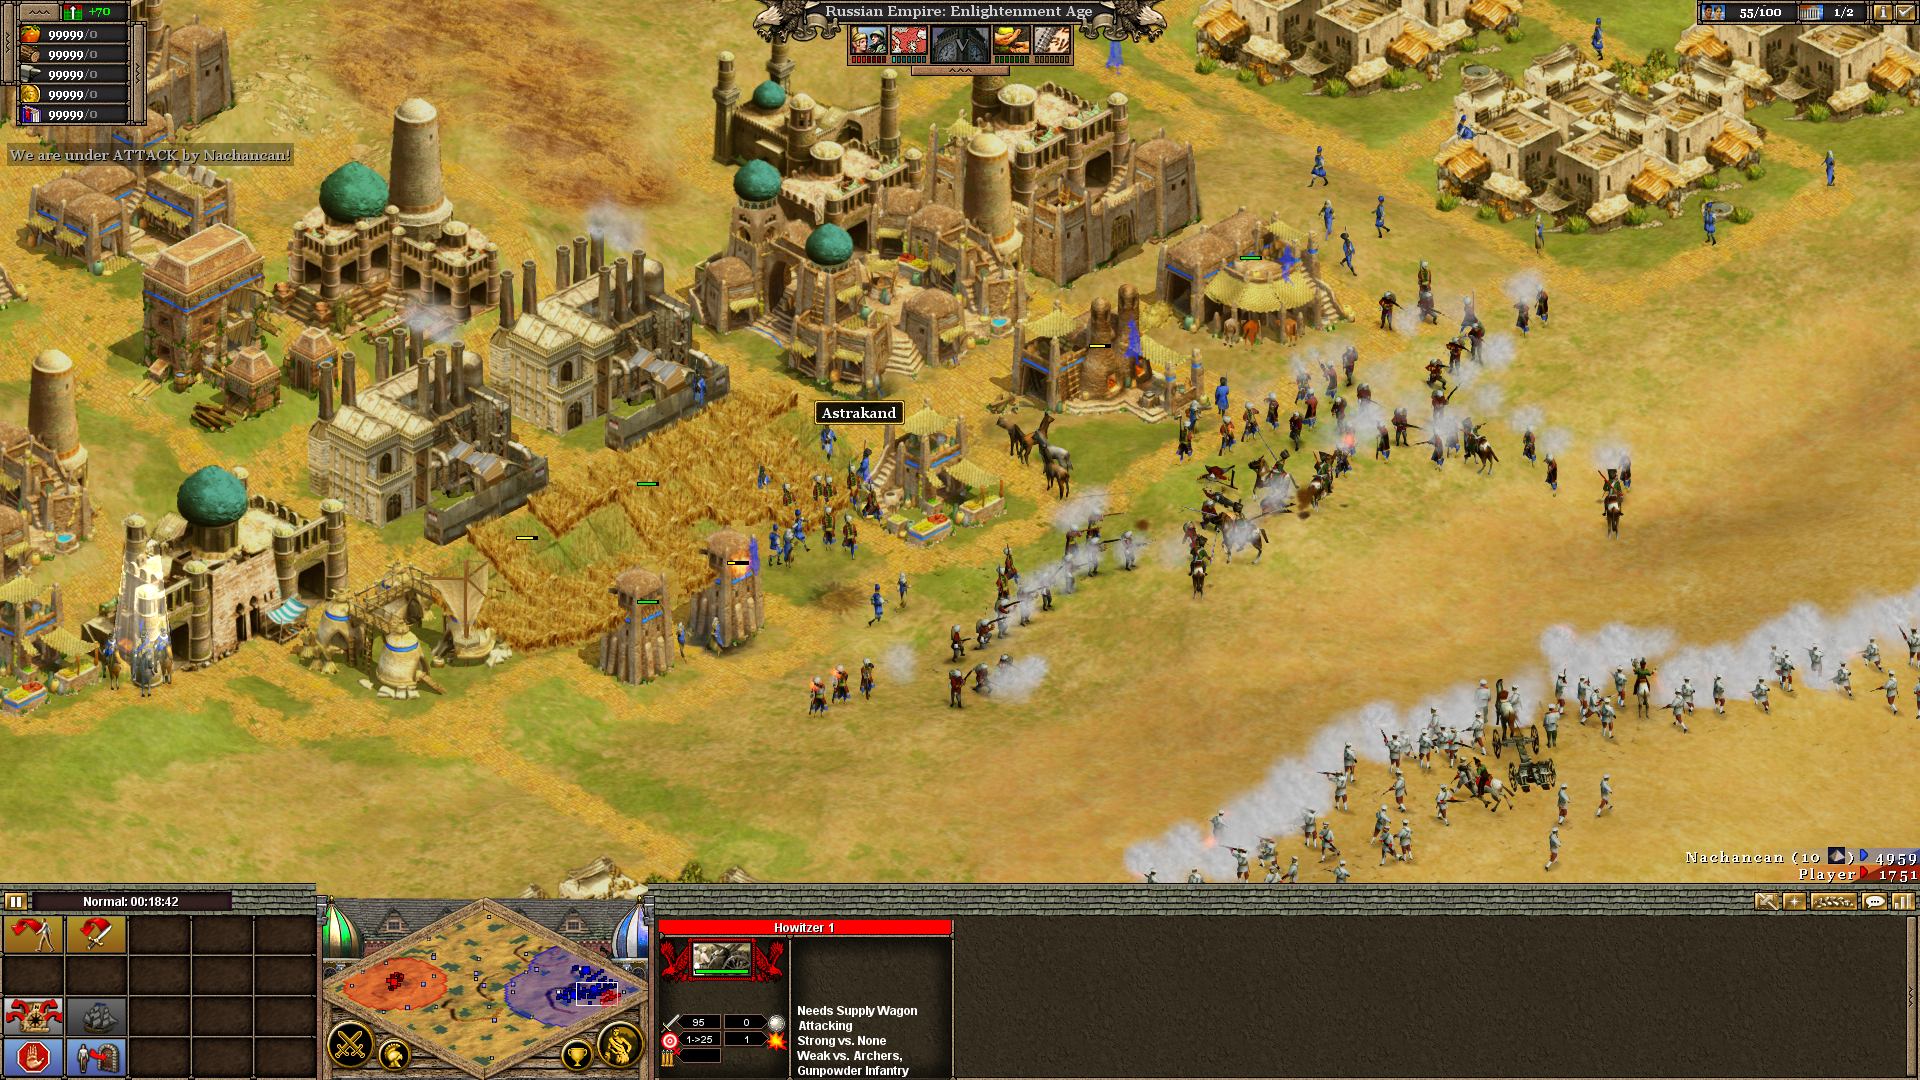 rise of nations steam